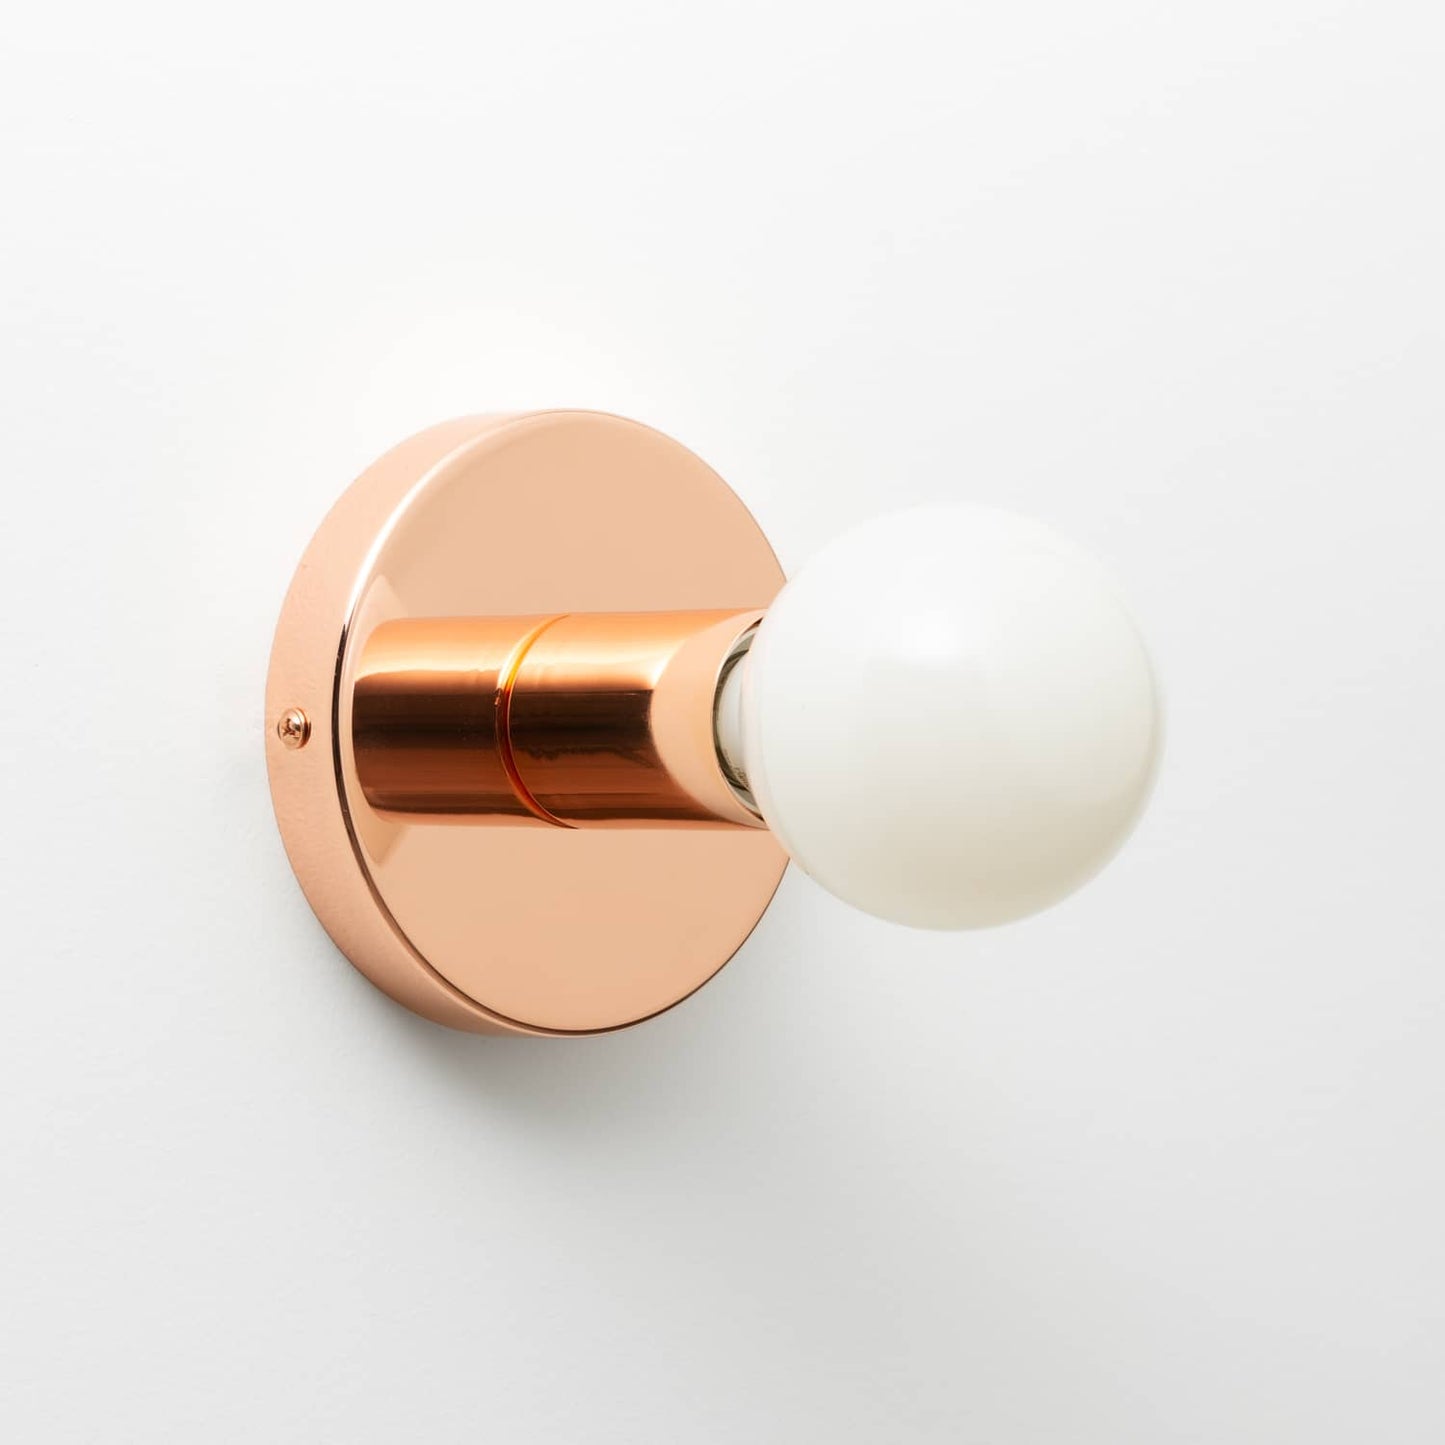 Button Light in Polished Copper finish pictured with G25 milk glass light bulb